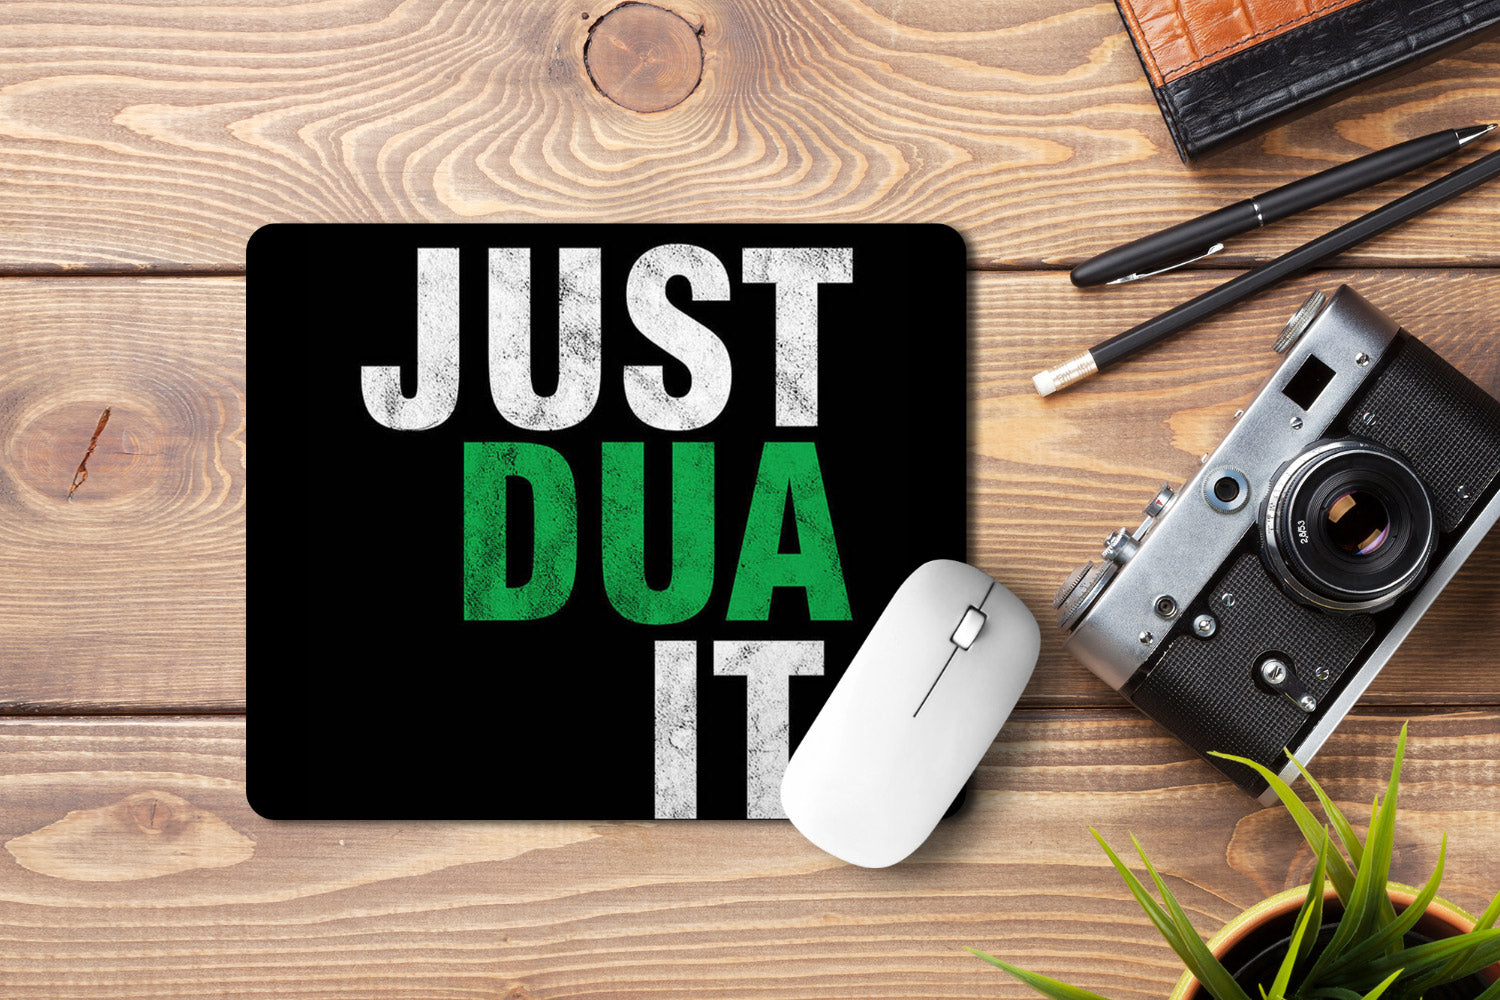 Just Dua It' Printed Non-Slip Rubber Base Mouse Pad for Laptop, PC, Computer.